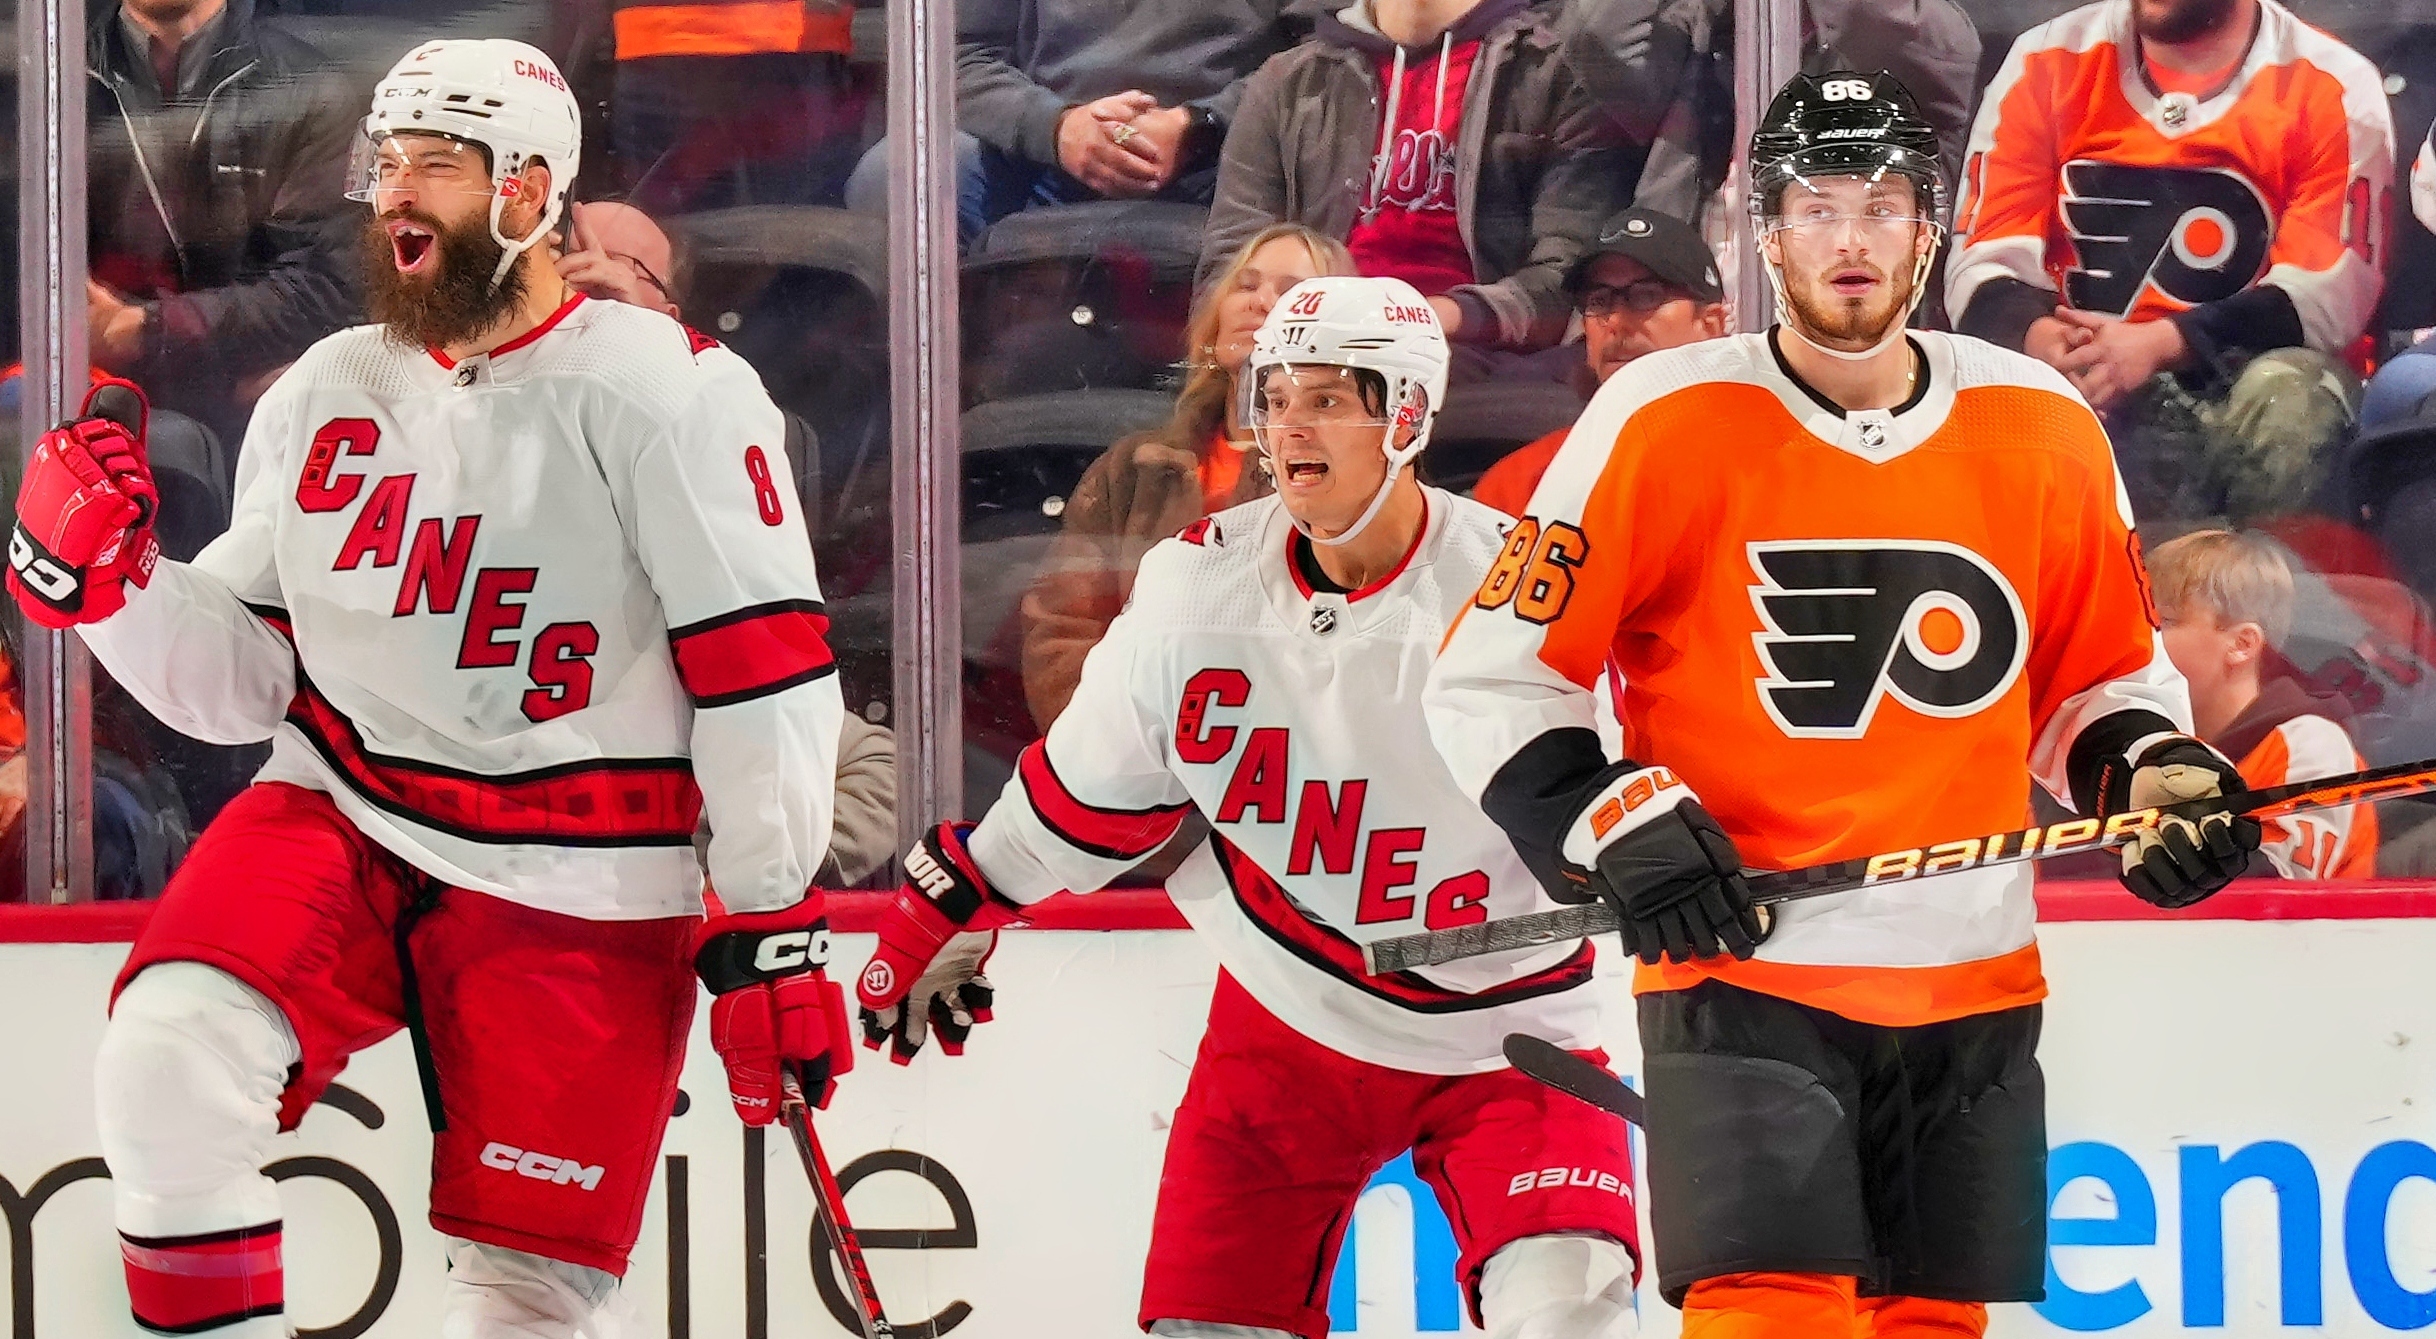 See photos of the Flyers taking on the Hurricanes